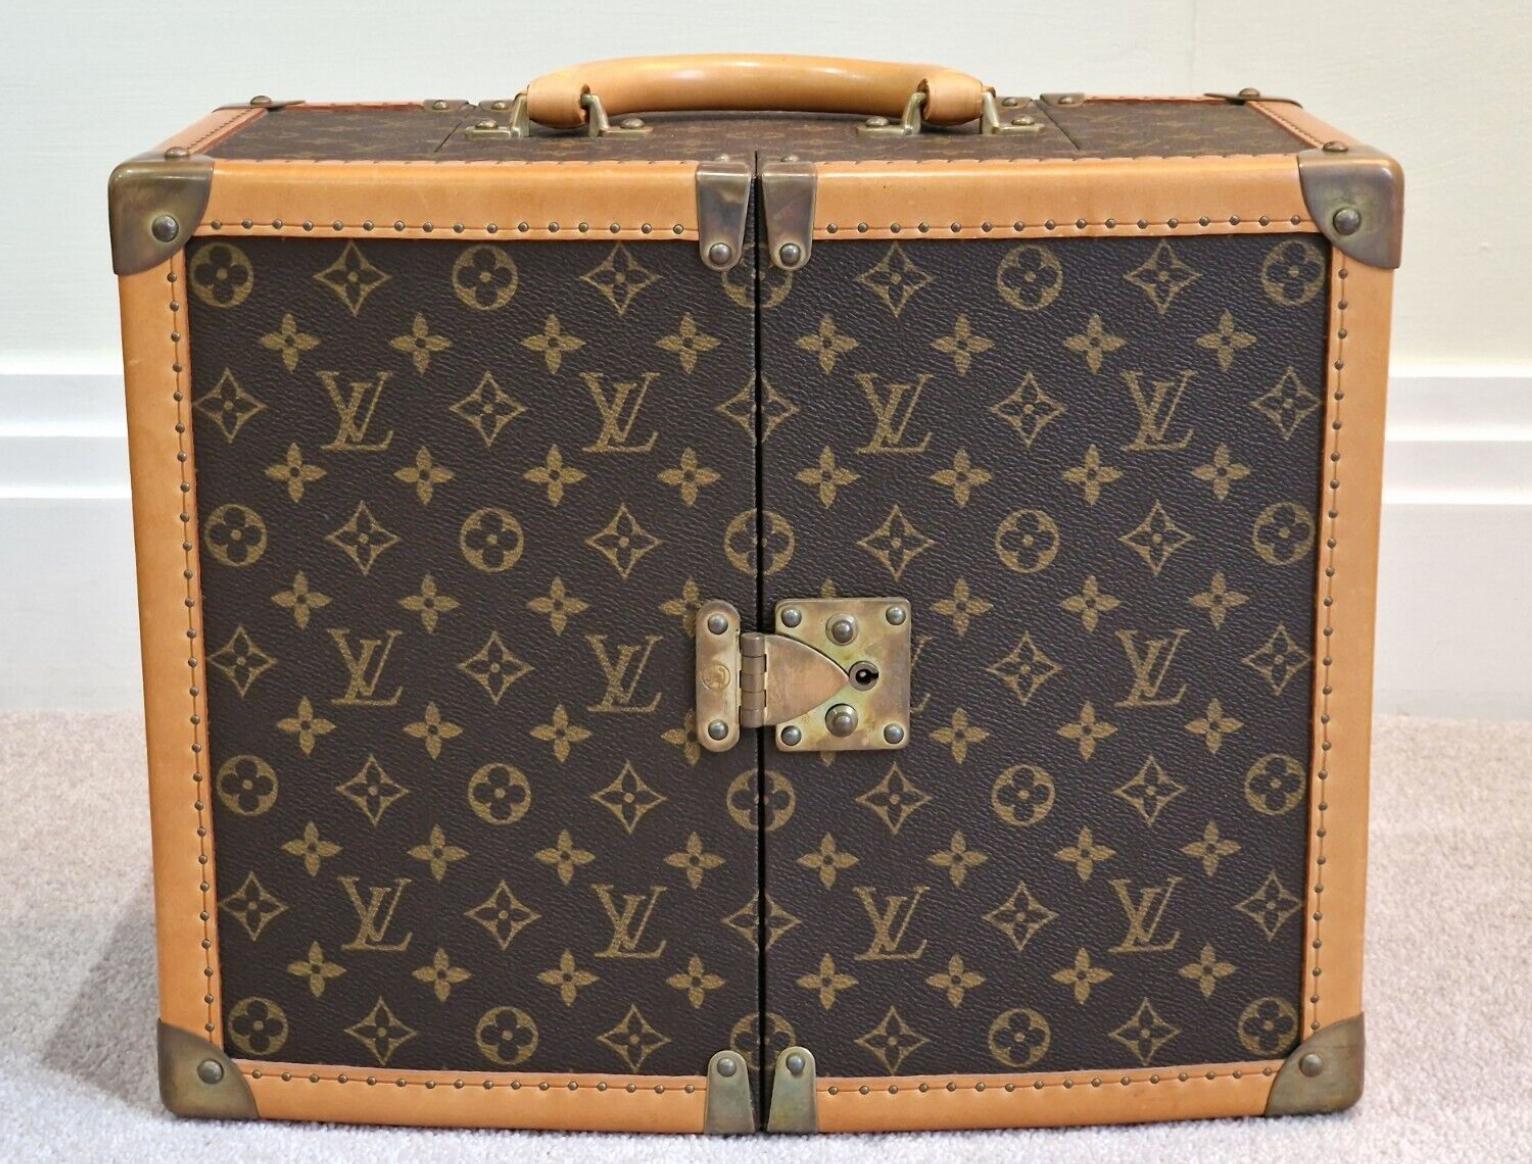 A unique and exceptional piece for collectors and fashion connoisseurs, the Louis Vuitton Limited Edition Monogram Canvas Amfar Sharon Stone Trunk combines high fashion with a noble cause. This rare and limited edition trunk was designed by the